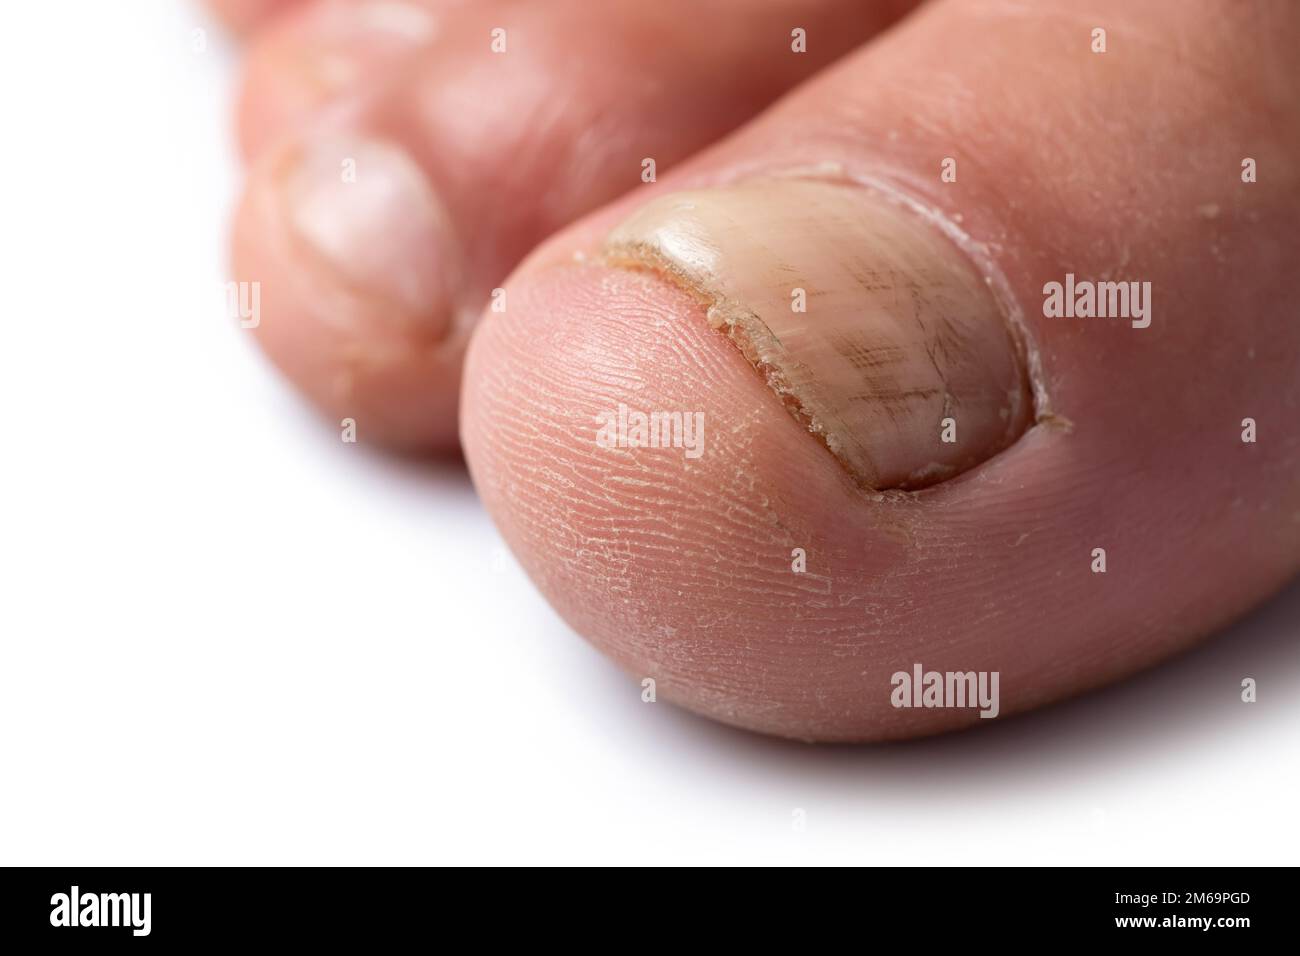 Close up image of a finger with nail fungus infection, Stock Photo